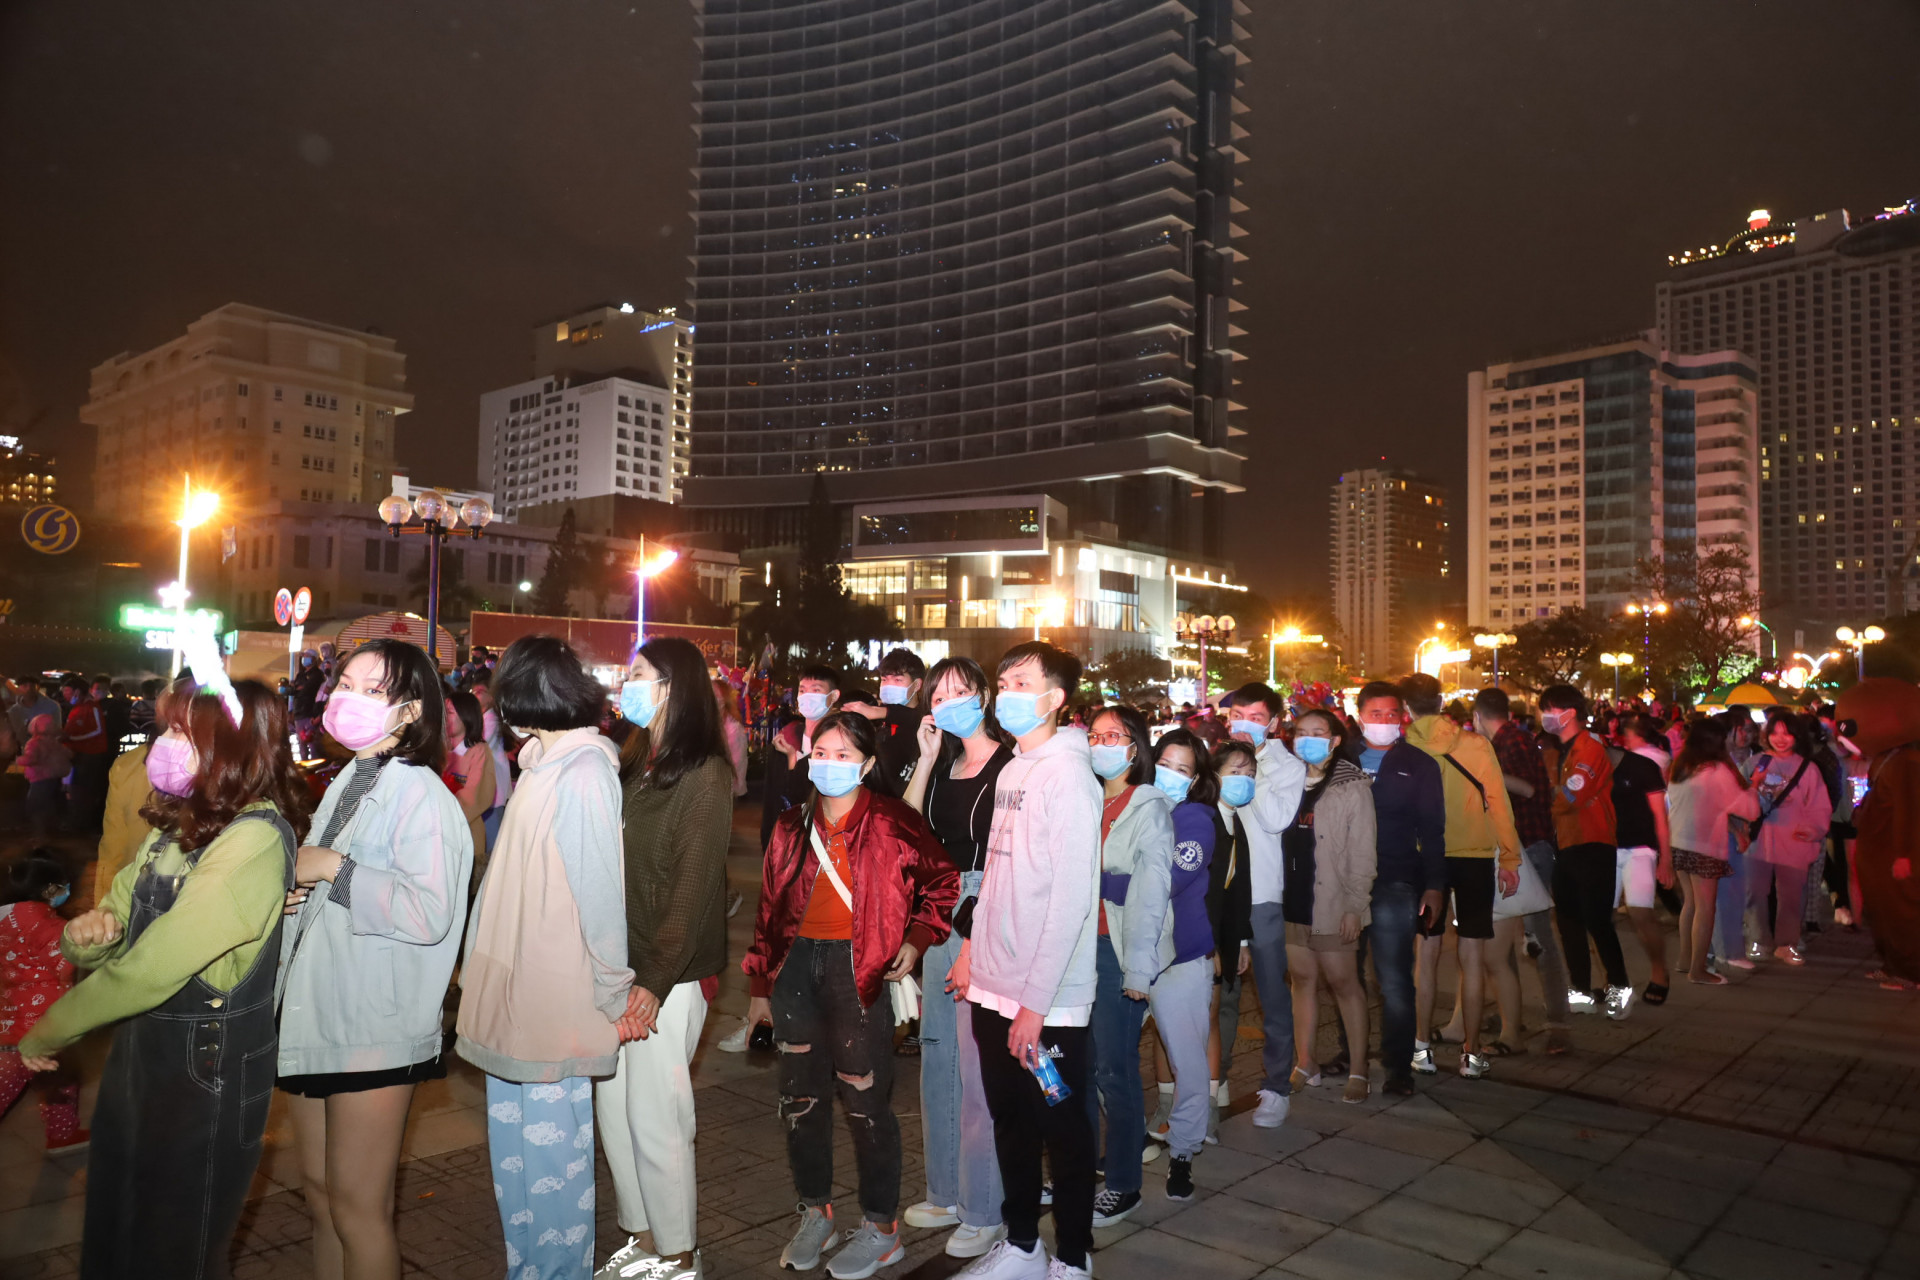 Queue of people waiting to get into music show area